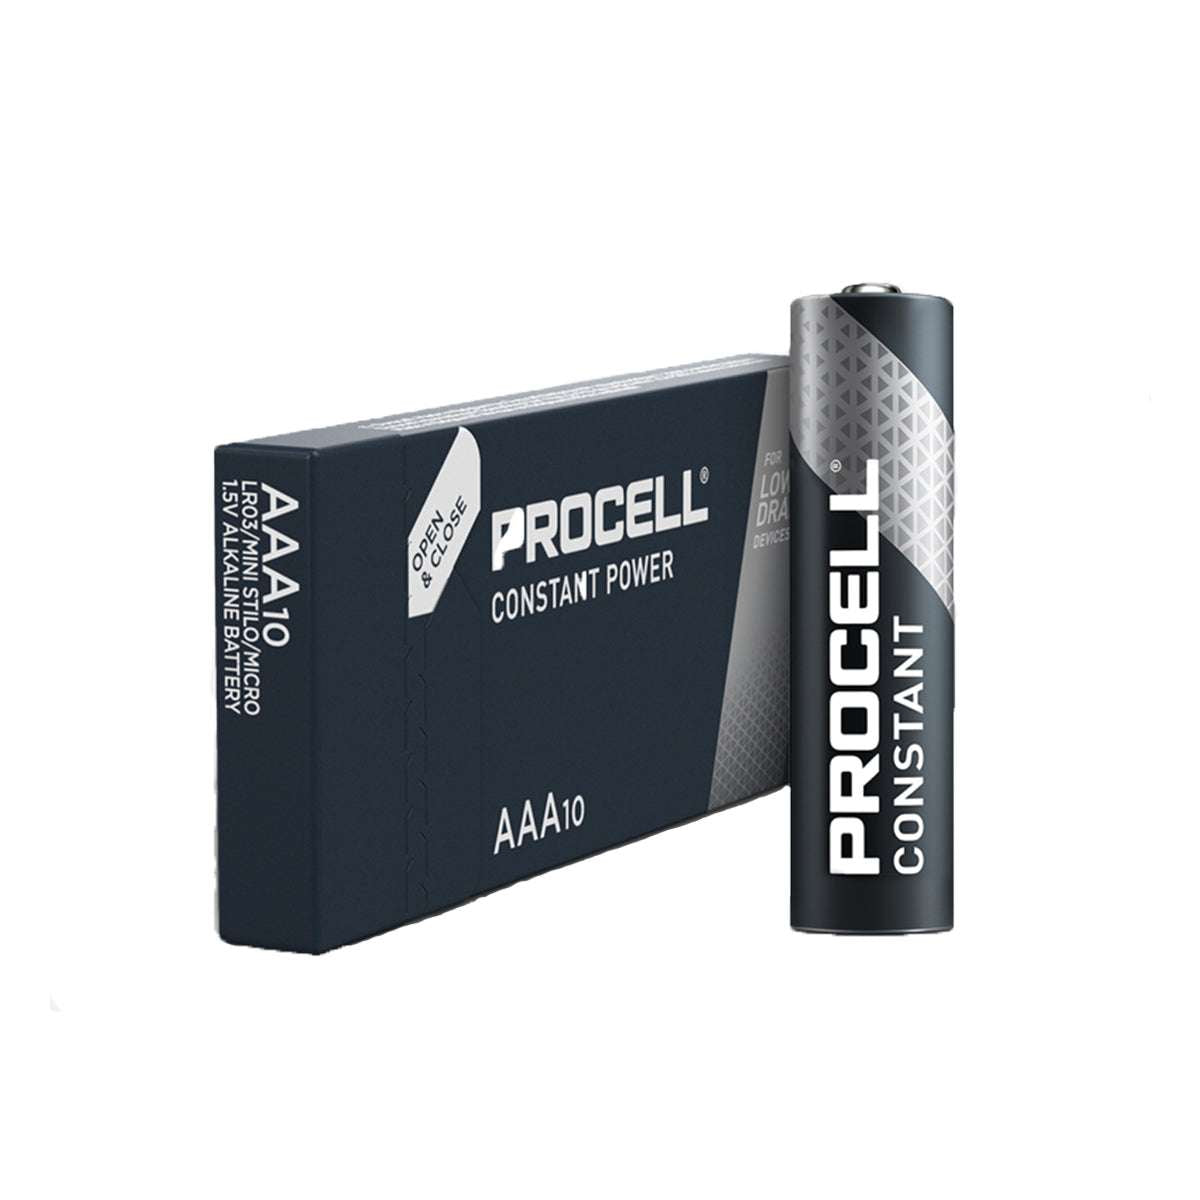 Constant Power AAA 1.5V Professional Alkaline Batteries in packs of 10 - Procell